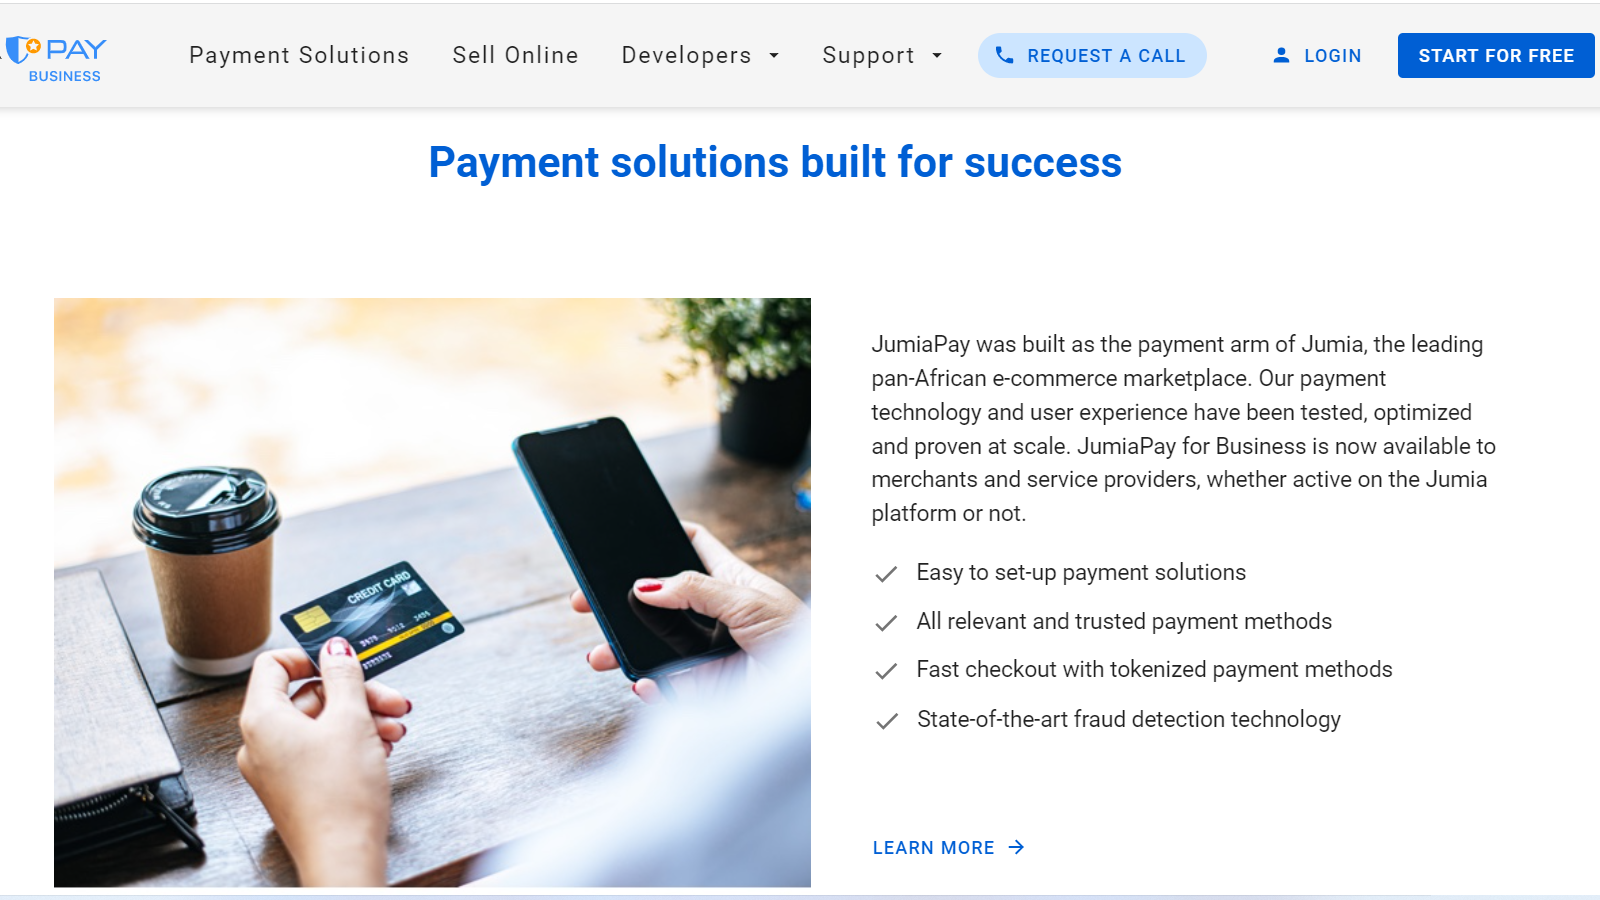 Increase your payments' success rate